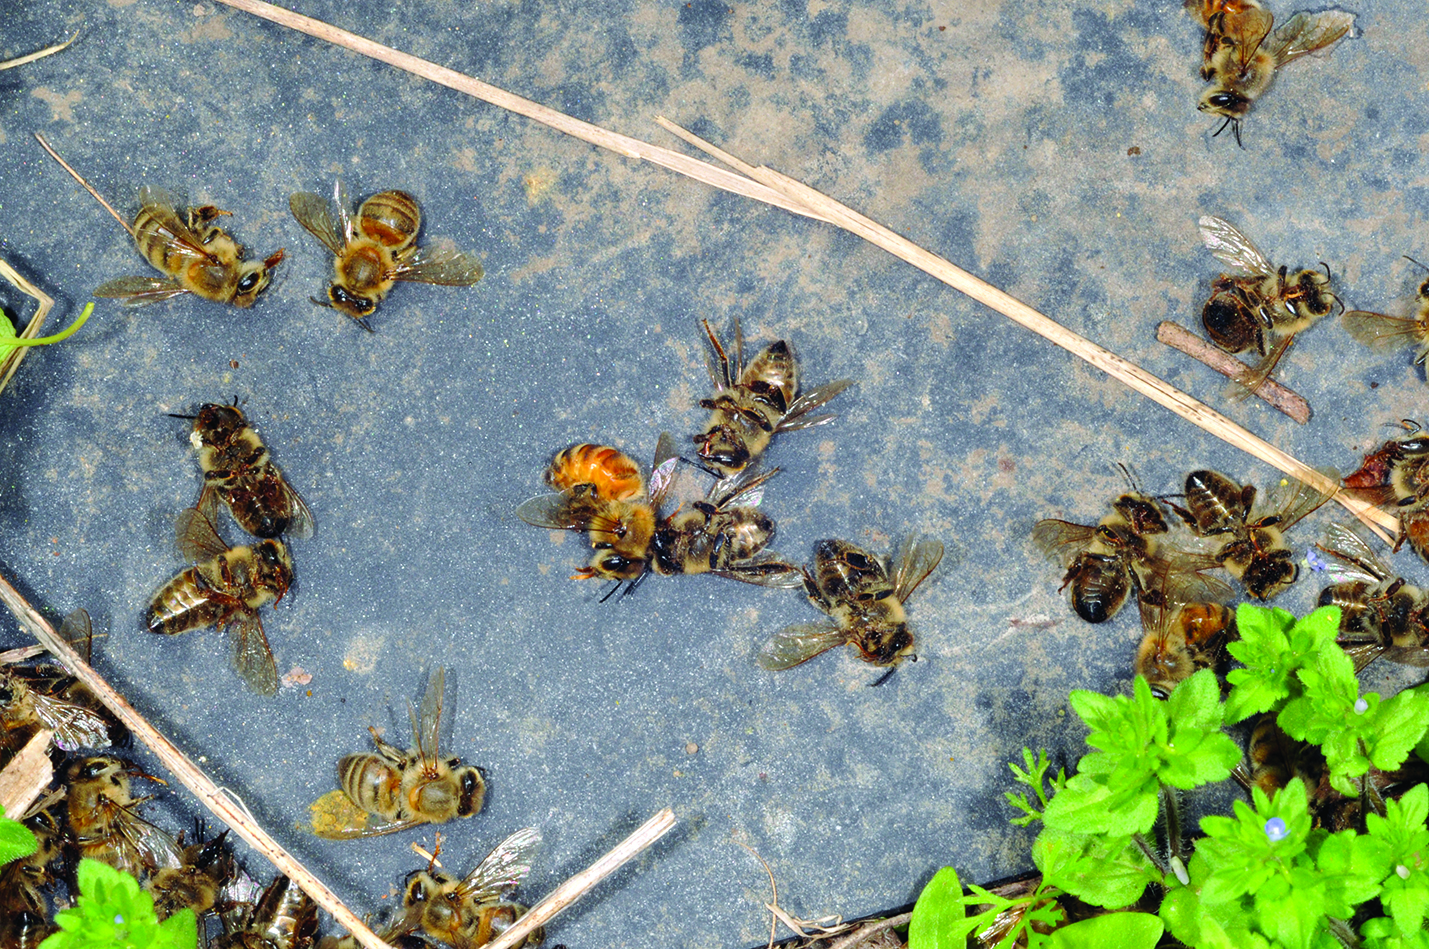 Figure 10. The sudden appearance of dead bees outside of hives is often a sign of pesticide poisoning.